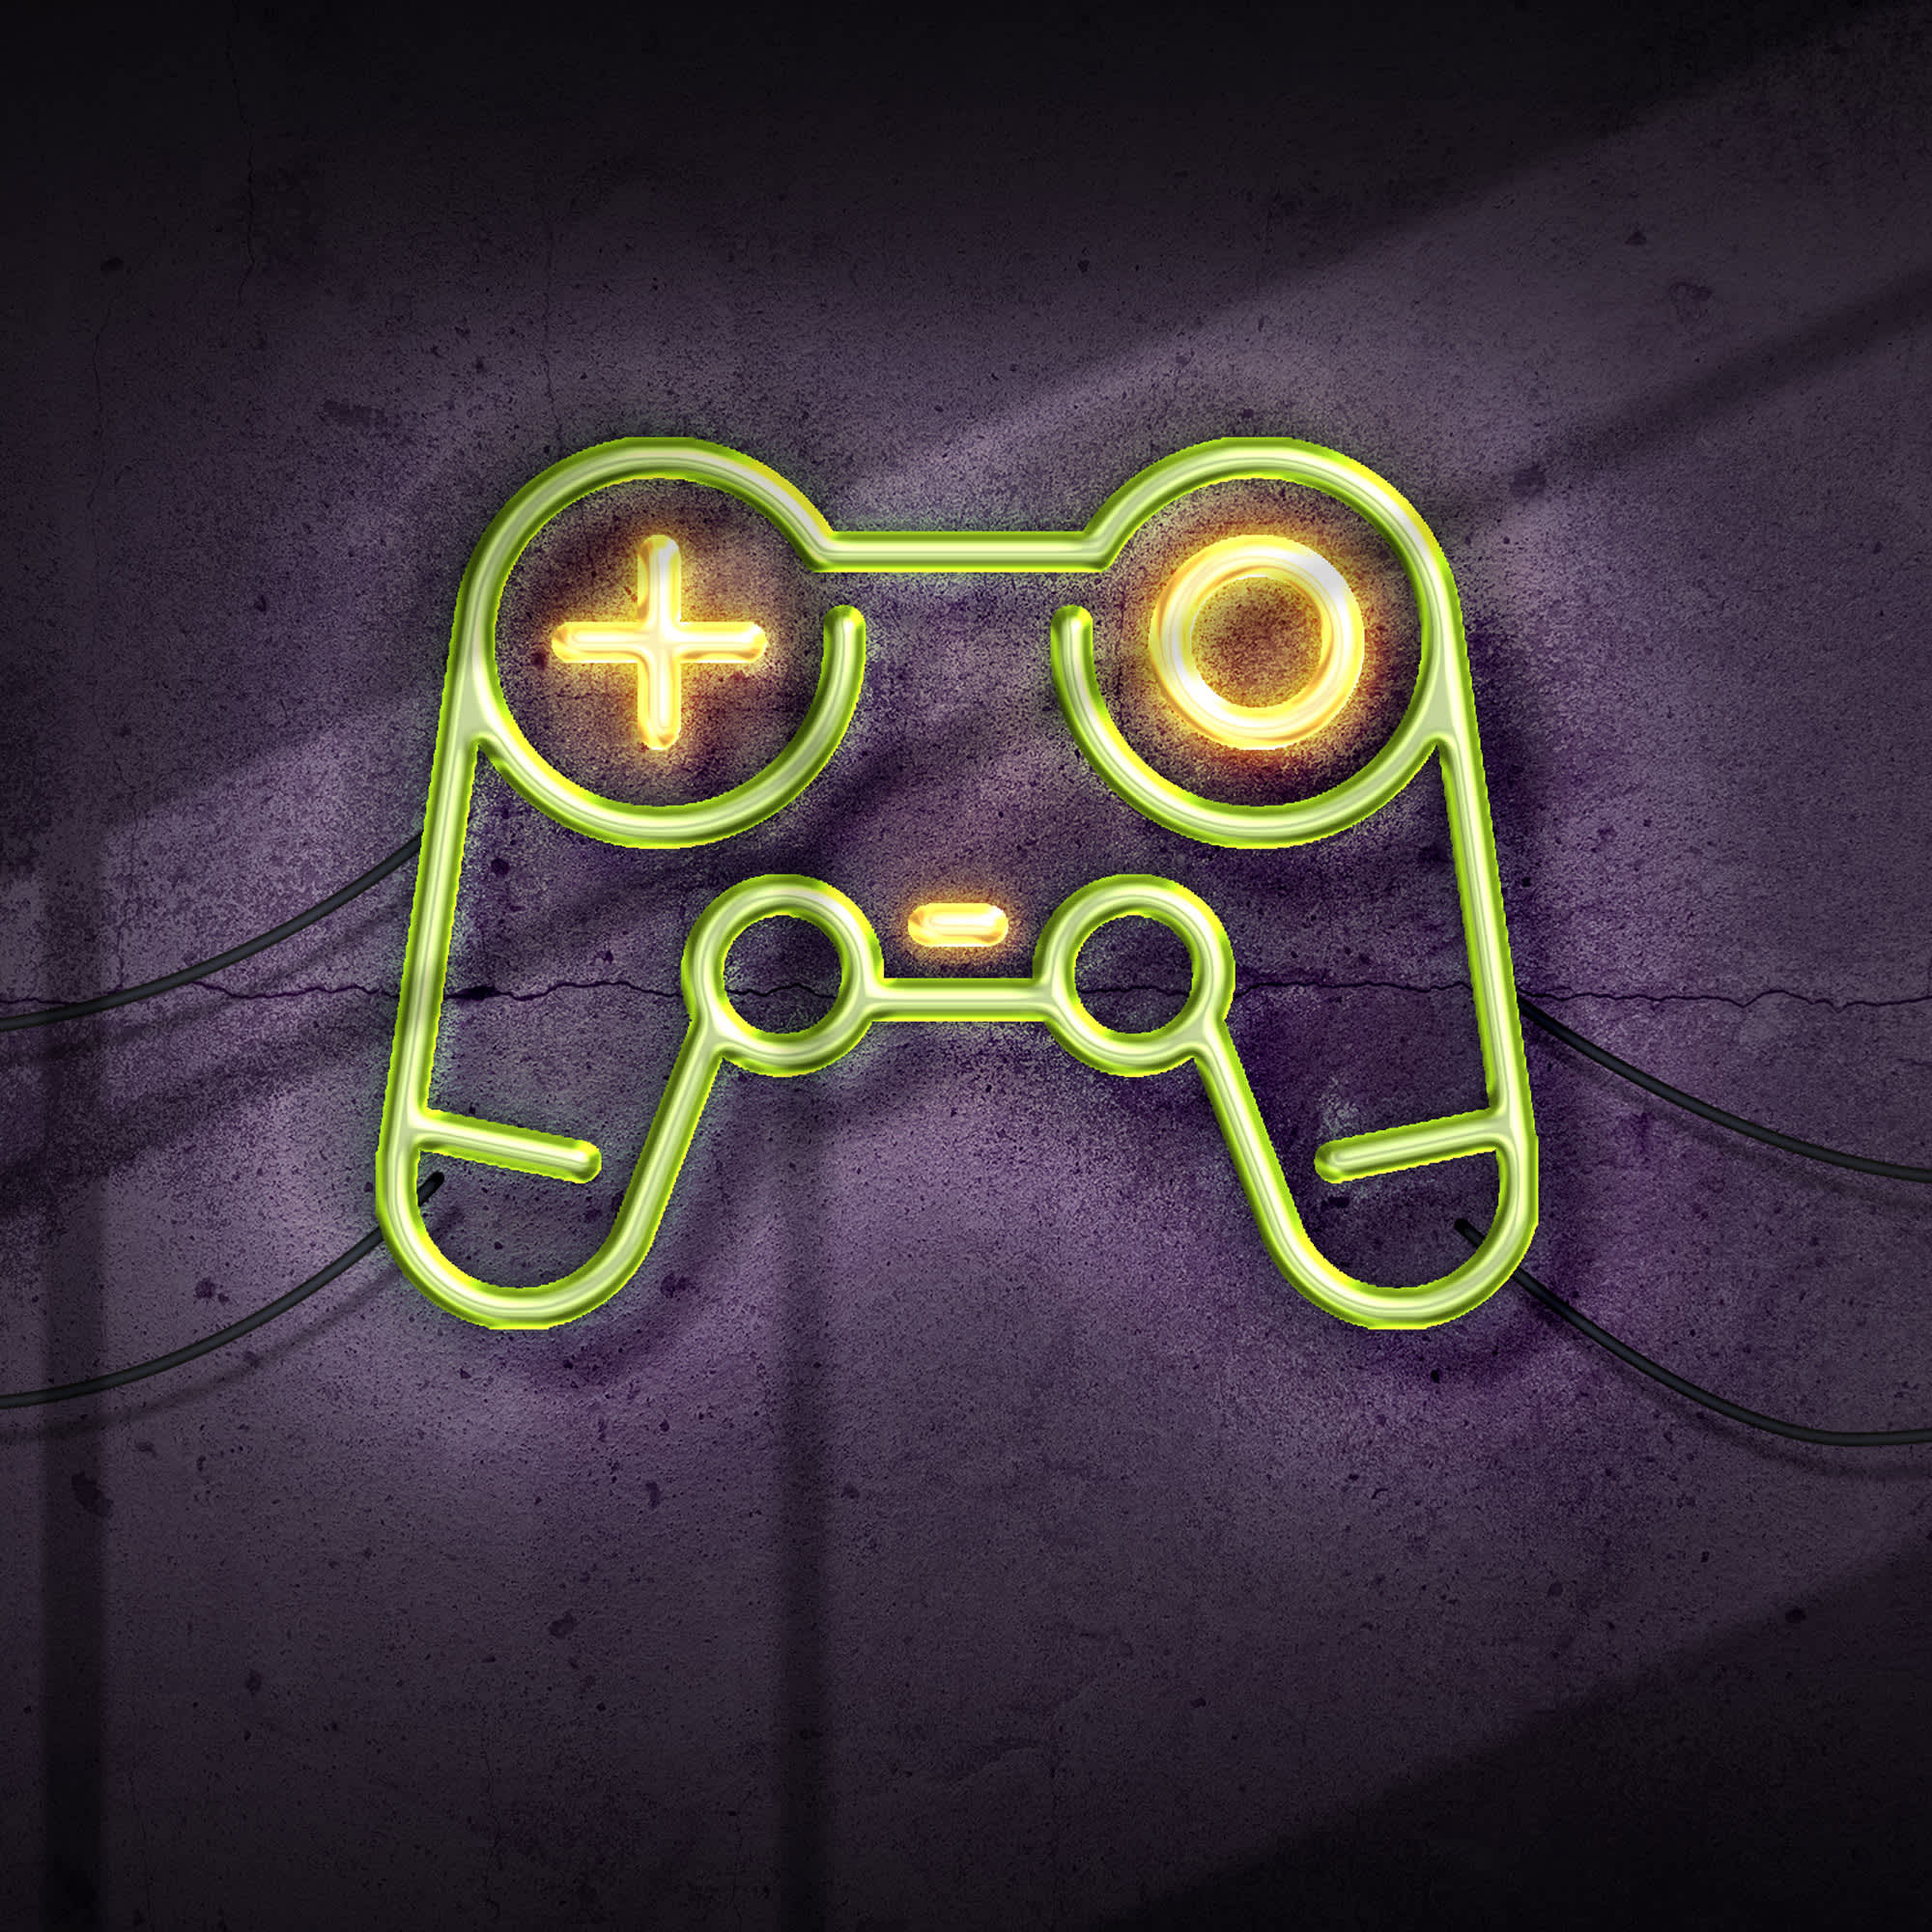 Neon green and yellow outline of a generic PlayStation or Xbox controller.